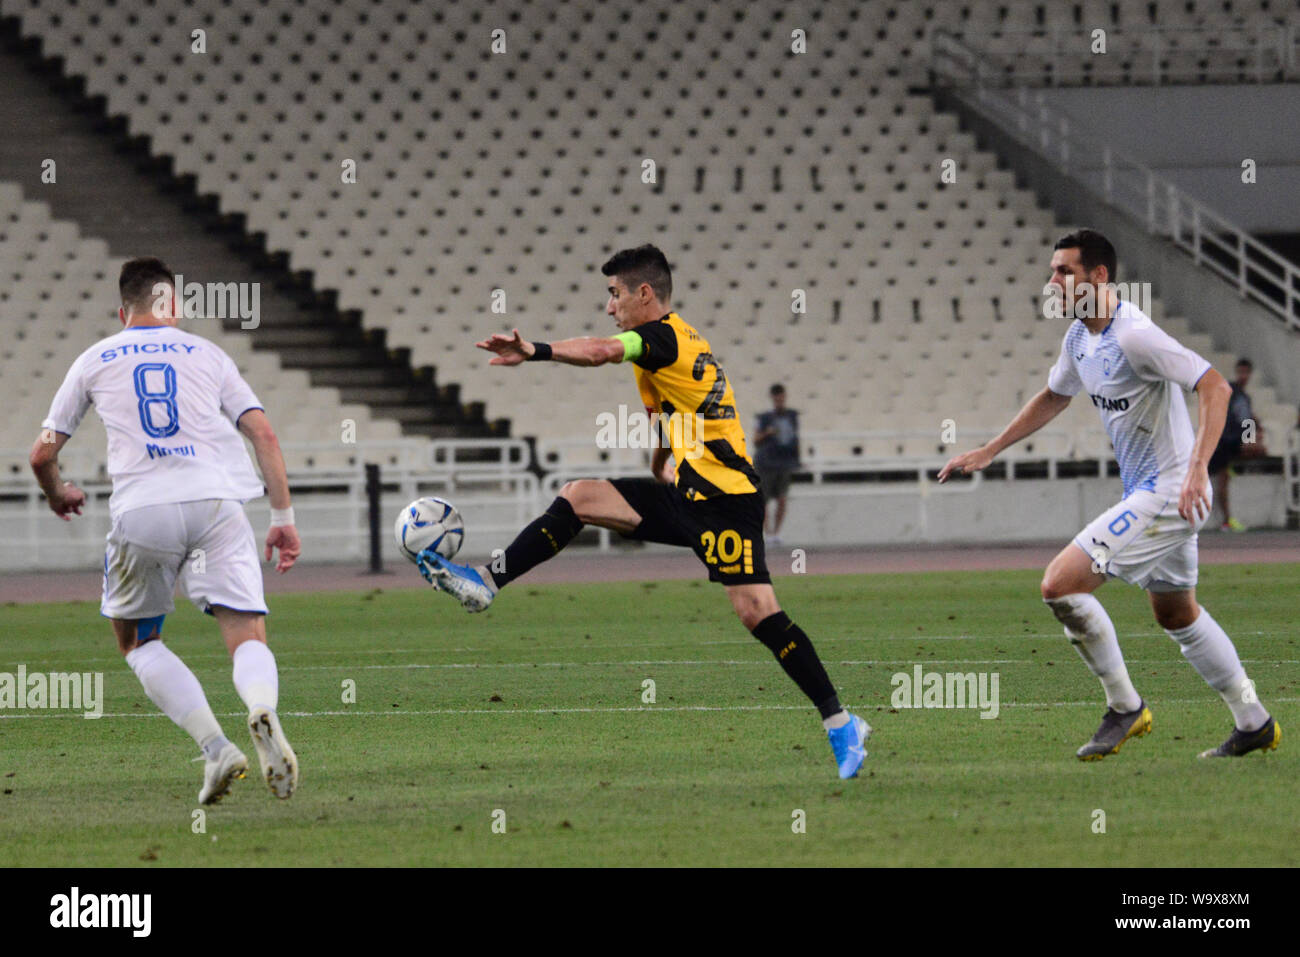 Athens, Greece. 15th Aug, 2019. Mantalos (no 20) of AEK controls the ball  under the pressure of two players of Craiova. (Photo by Dimitrios  Karvountzis/Pacific Press) Credit: Pacific Press Agency/Alamy Live News